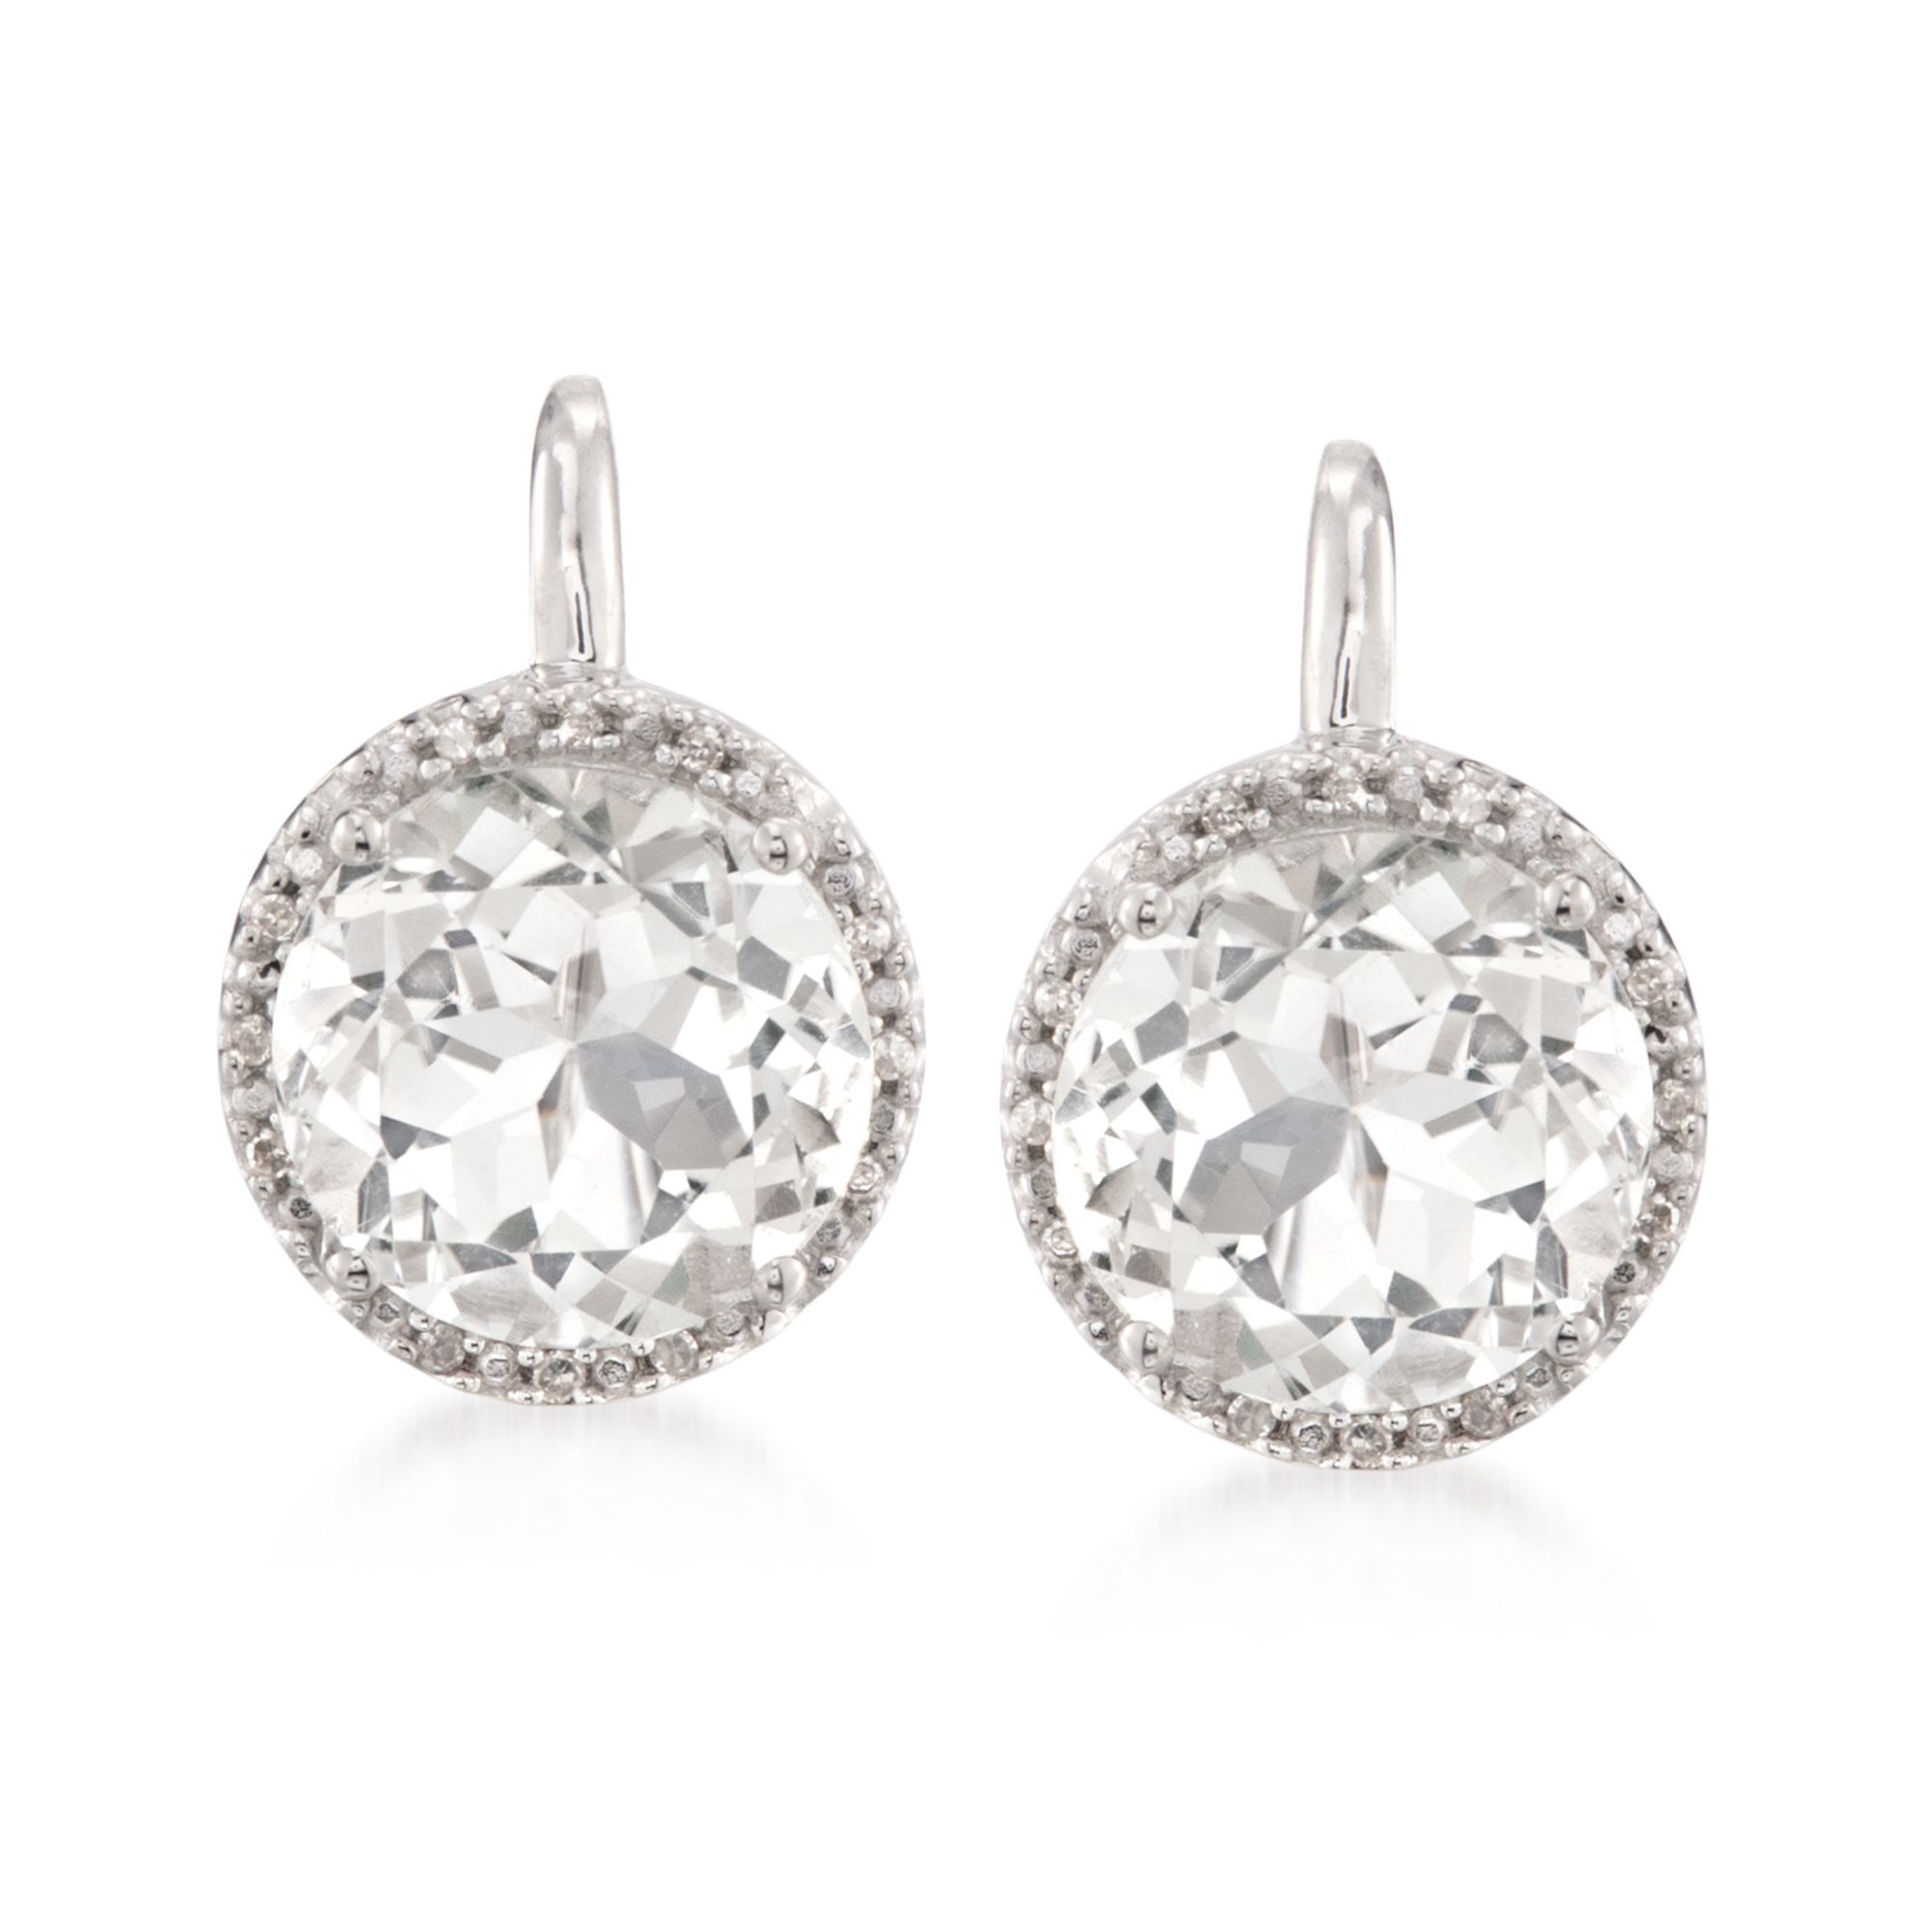 7.75 ct. t.w. White Topaz Earrings with Diamond Accents in Sterling Silver  | Ross-Simons